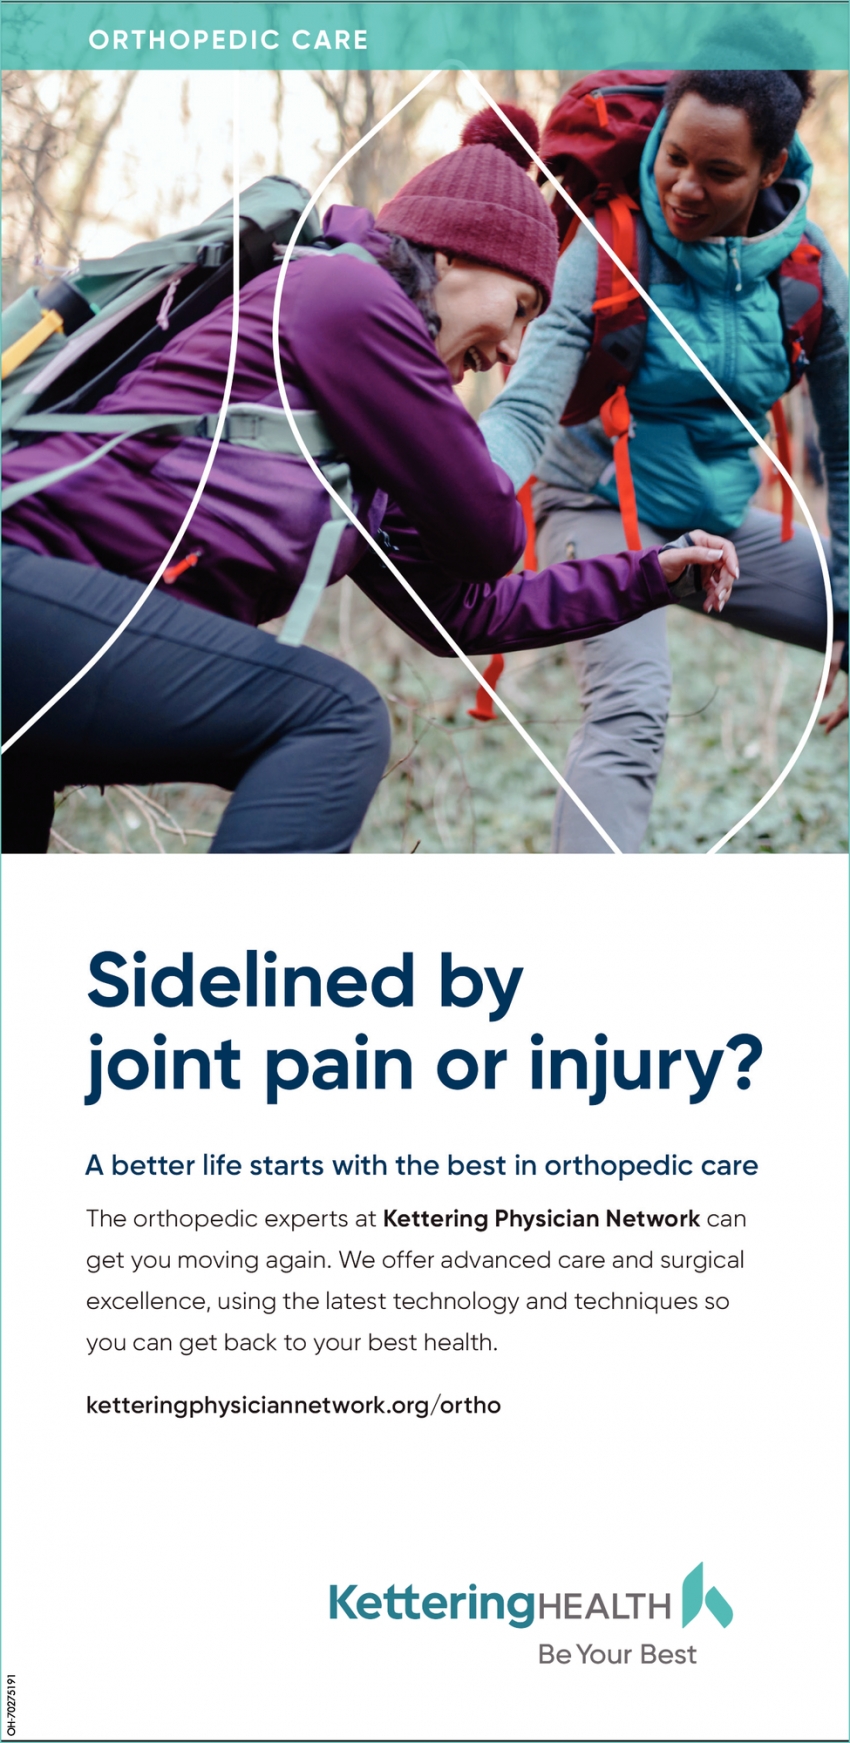 Sidelined By Joint Pain Injury?